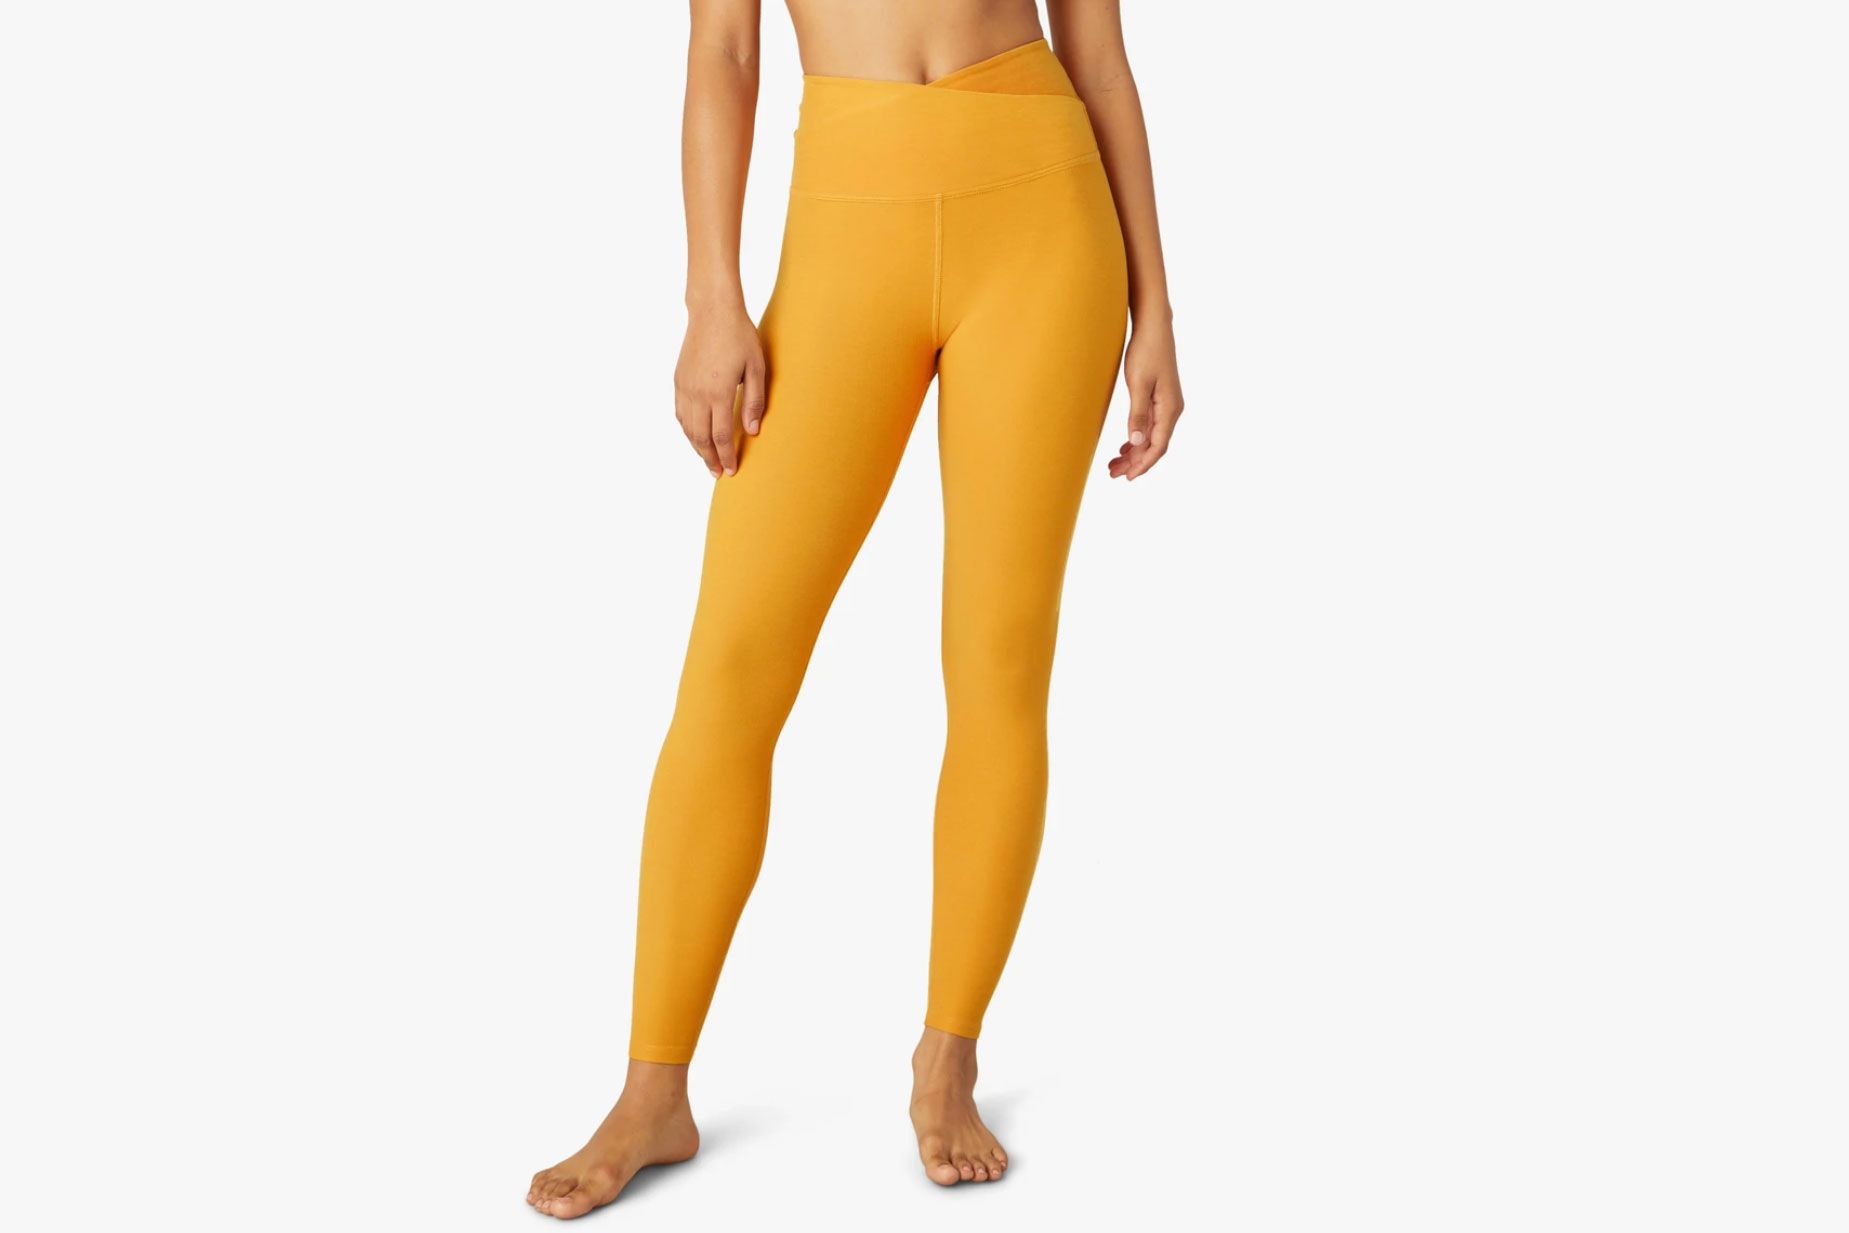 10 Comfy + Legging Friendly Looks - Living in Yellow